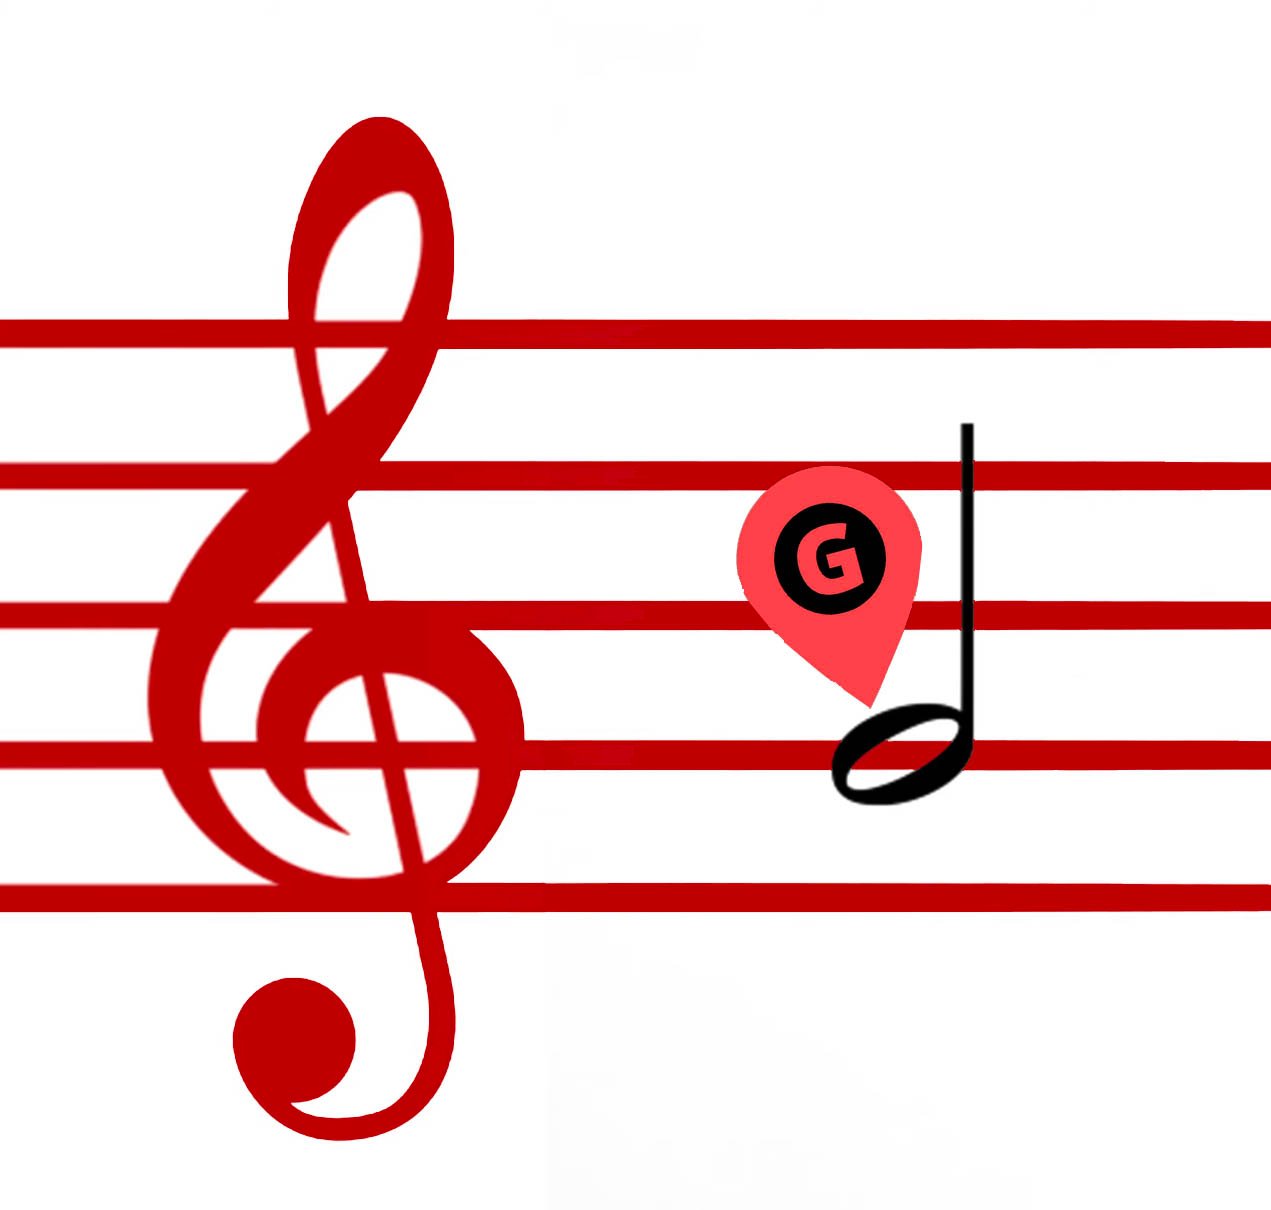 Red staff with G in half note, landmark arrow pointing to G.